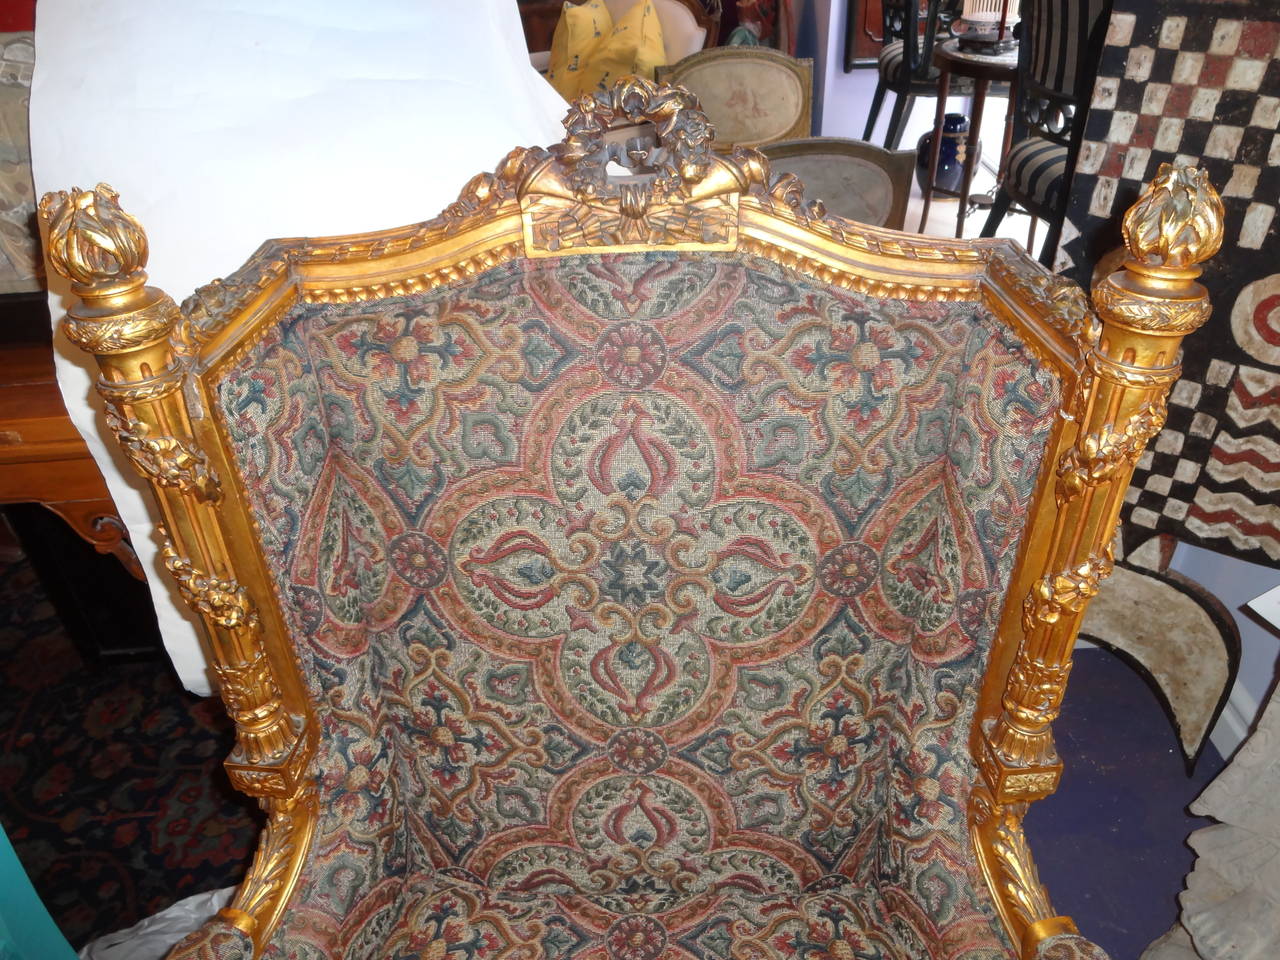 An ornately carved giltwood bergere à oreilles (closed arm chair), back centered with laurel wreath, sides have beautifully carved torcheres with entwined garlands terminating in flames. The fluted front and side apron have draped flower garlands